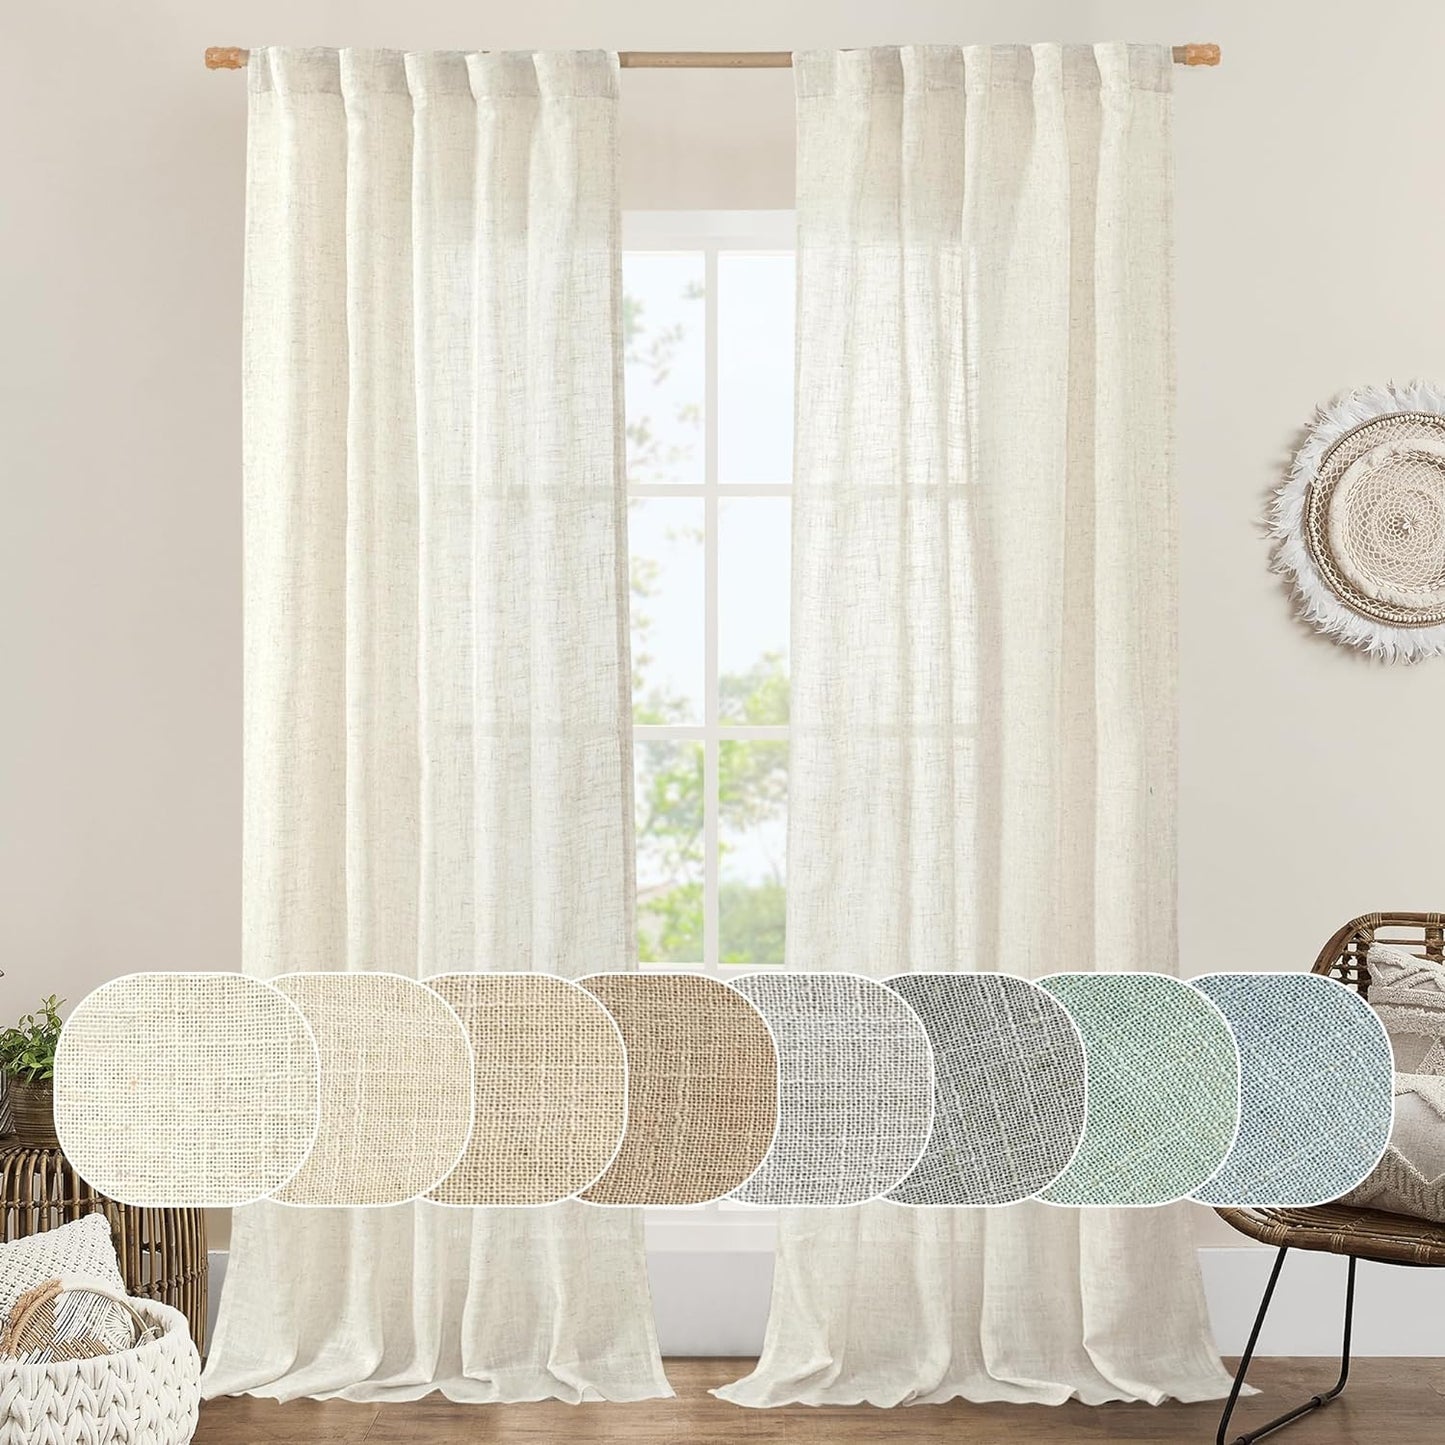 LAMIT Natural Linen Blended Curtains for Living Room, Back Tab and Rod Pocket Semi Sheer Curtains Light Filtering Country Rustic Drapes for Bedroom/Farmhouse, 2 Panels,52 X 108 Inch, Linen  LAMIT Natural 42W X 84L 